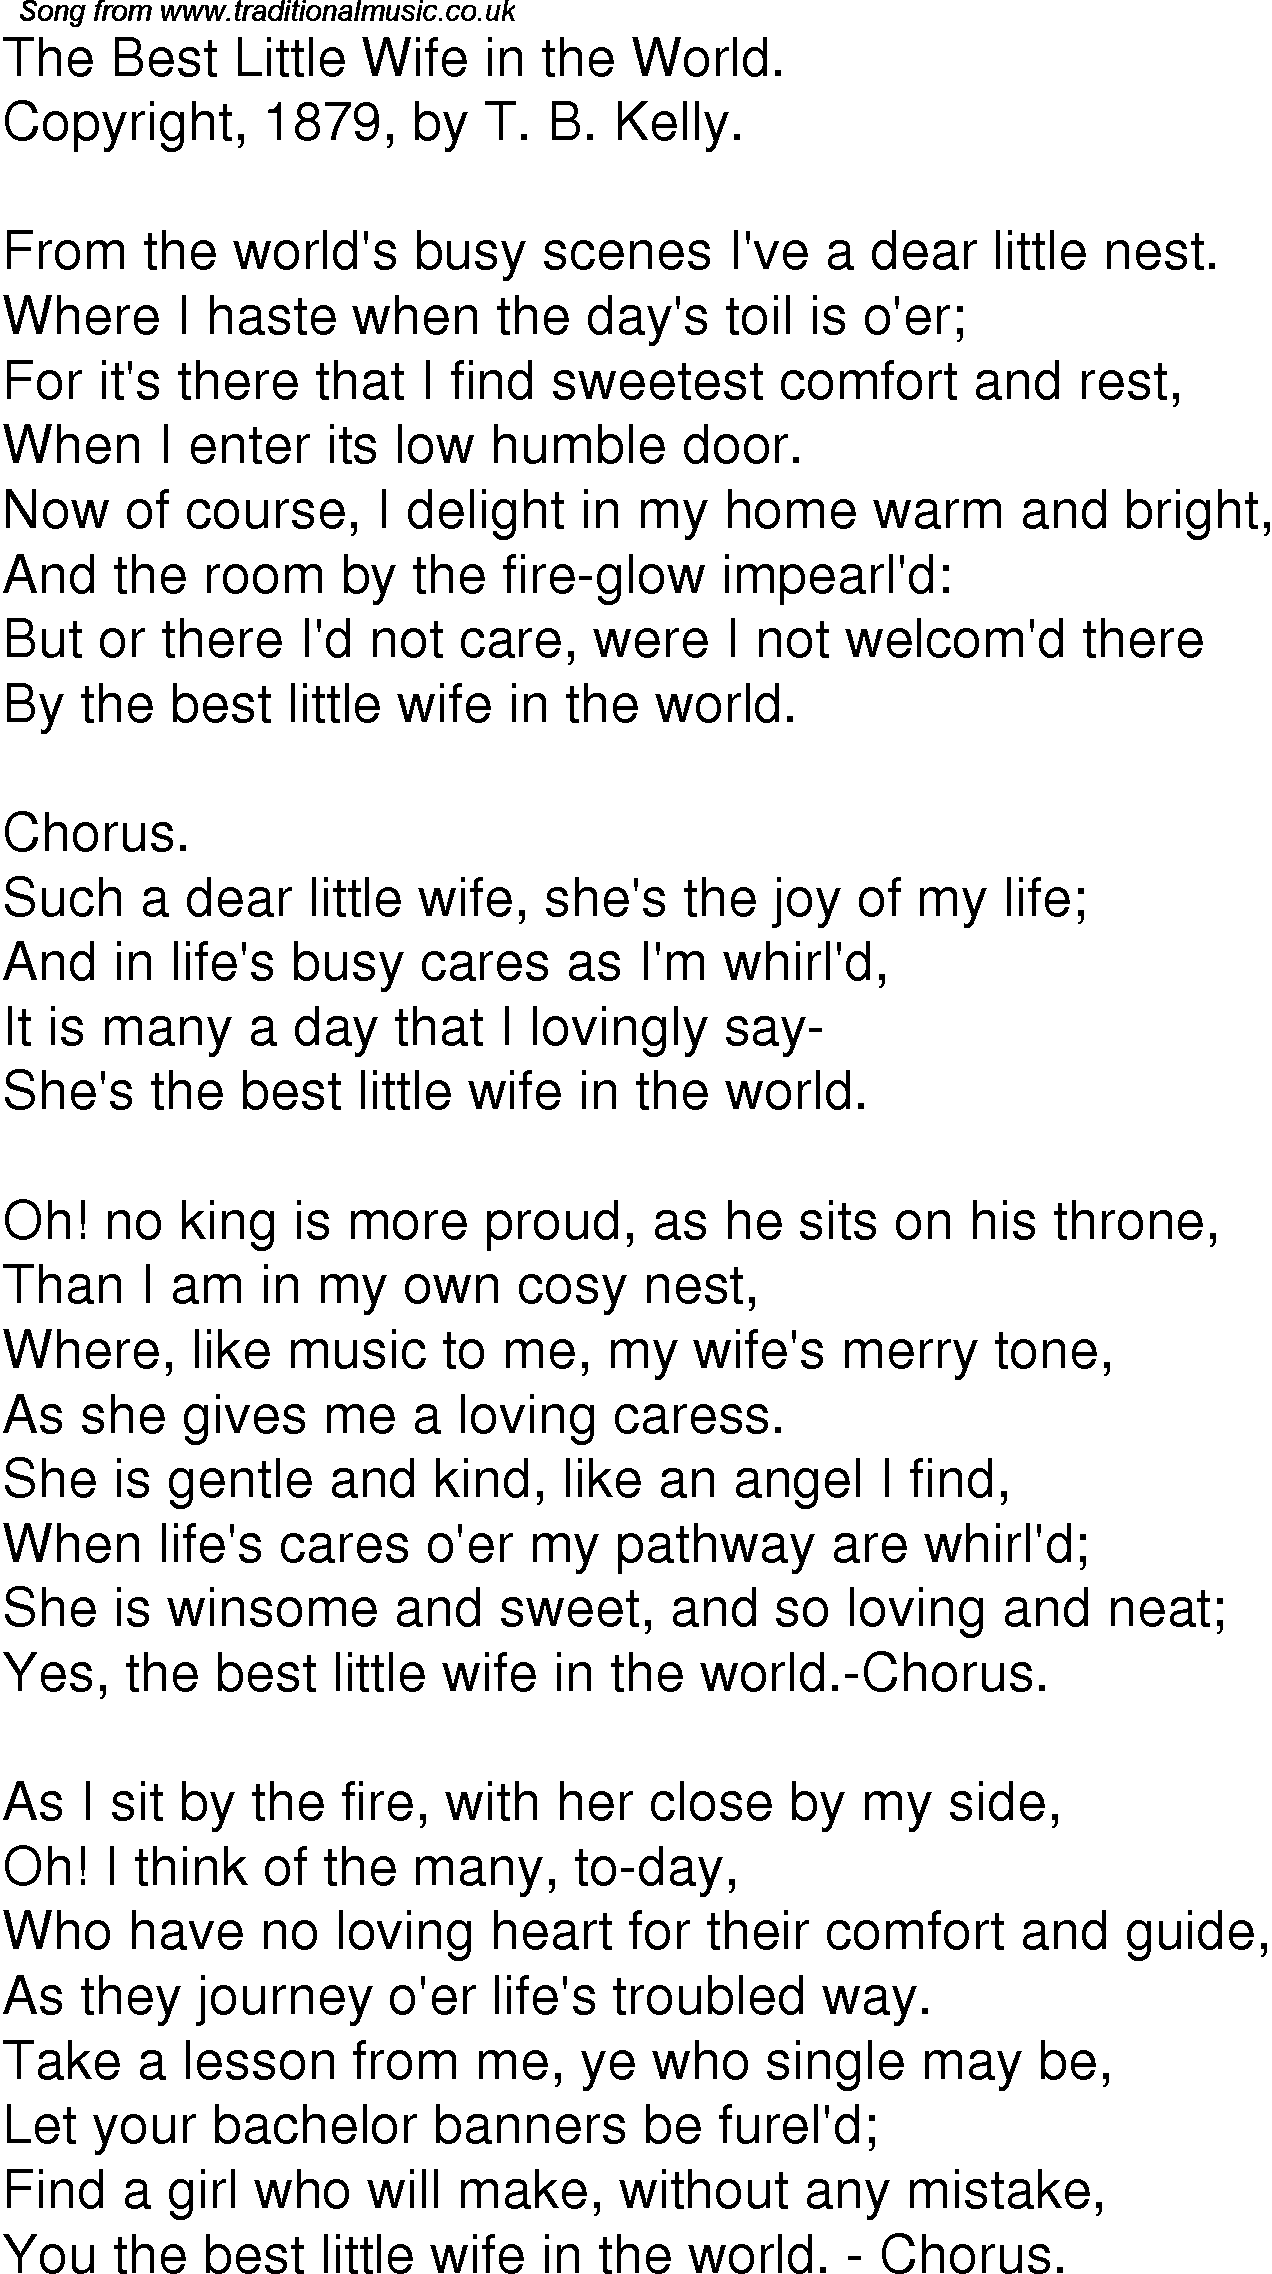 Old Time Song Lyrics for 05 The Best Little Wife In The World